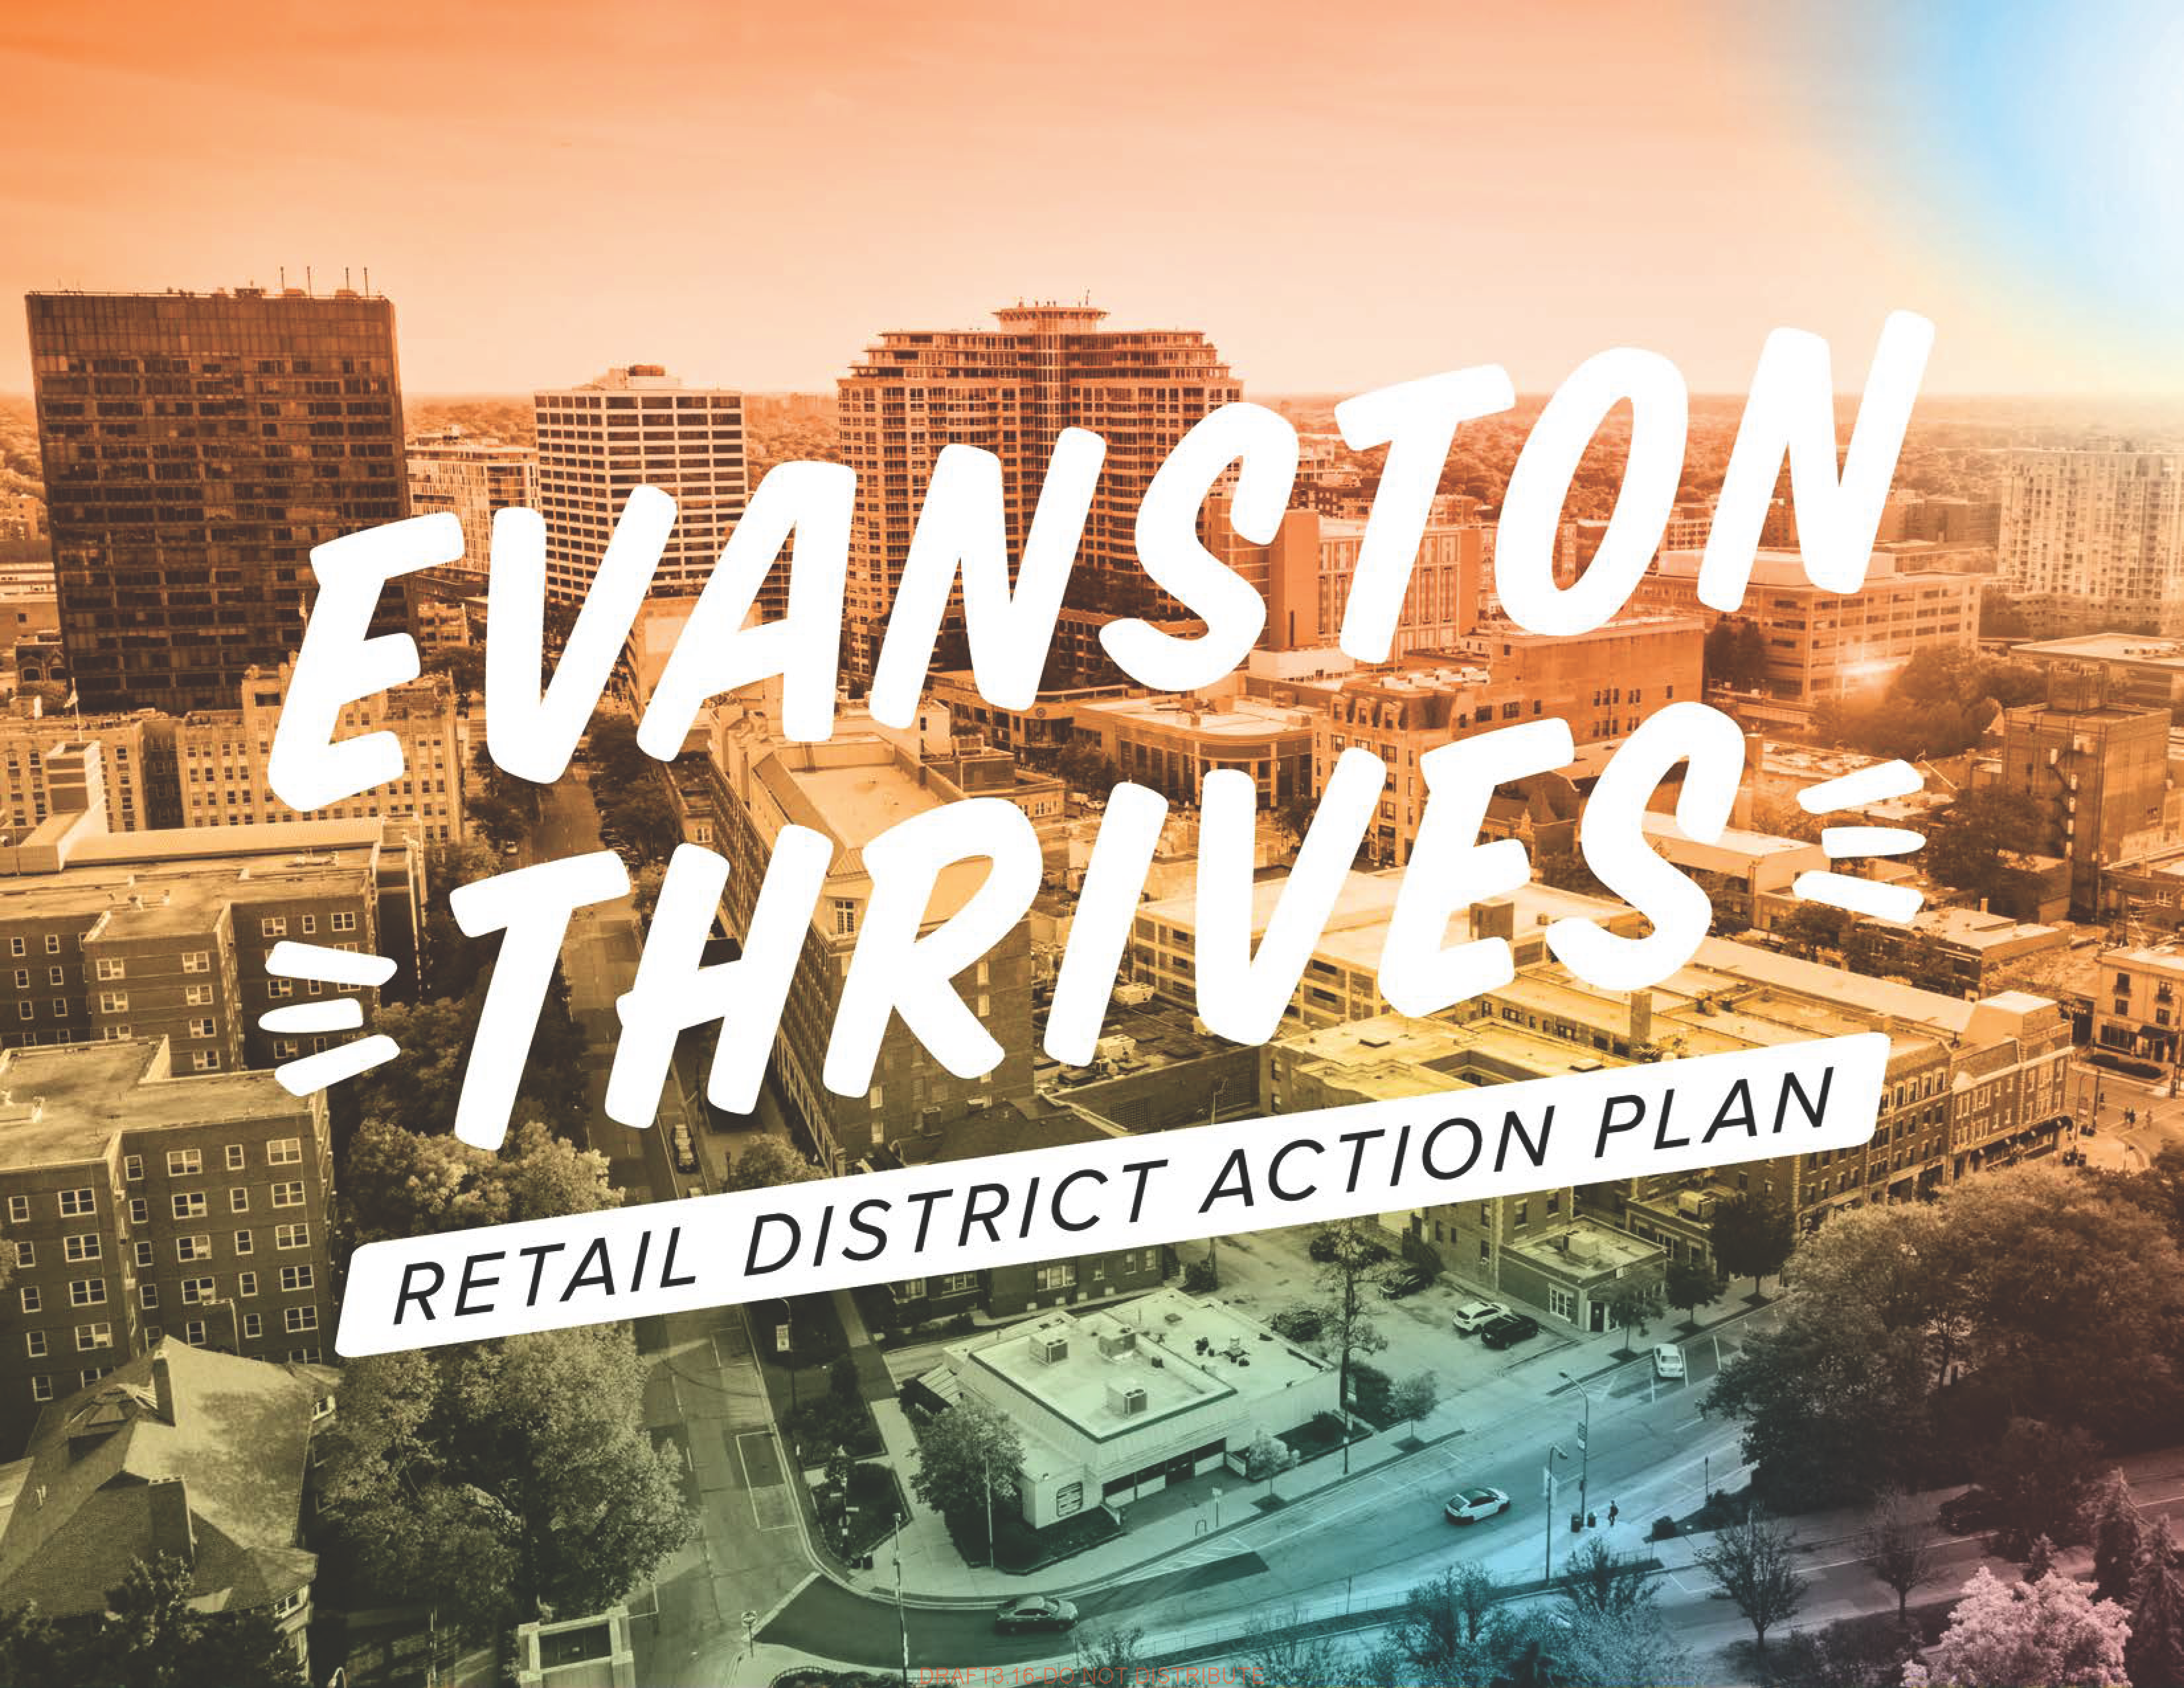 Evanston Thrives Retail District Action Plan Suggests Moving the Farmers Market. Guess Where.